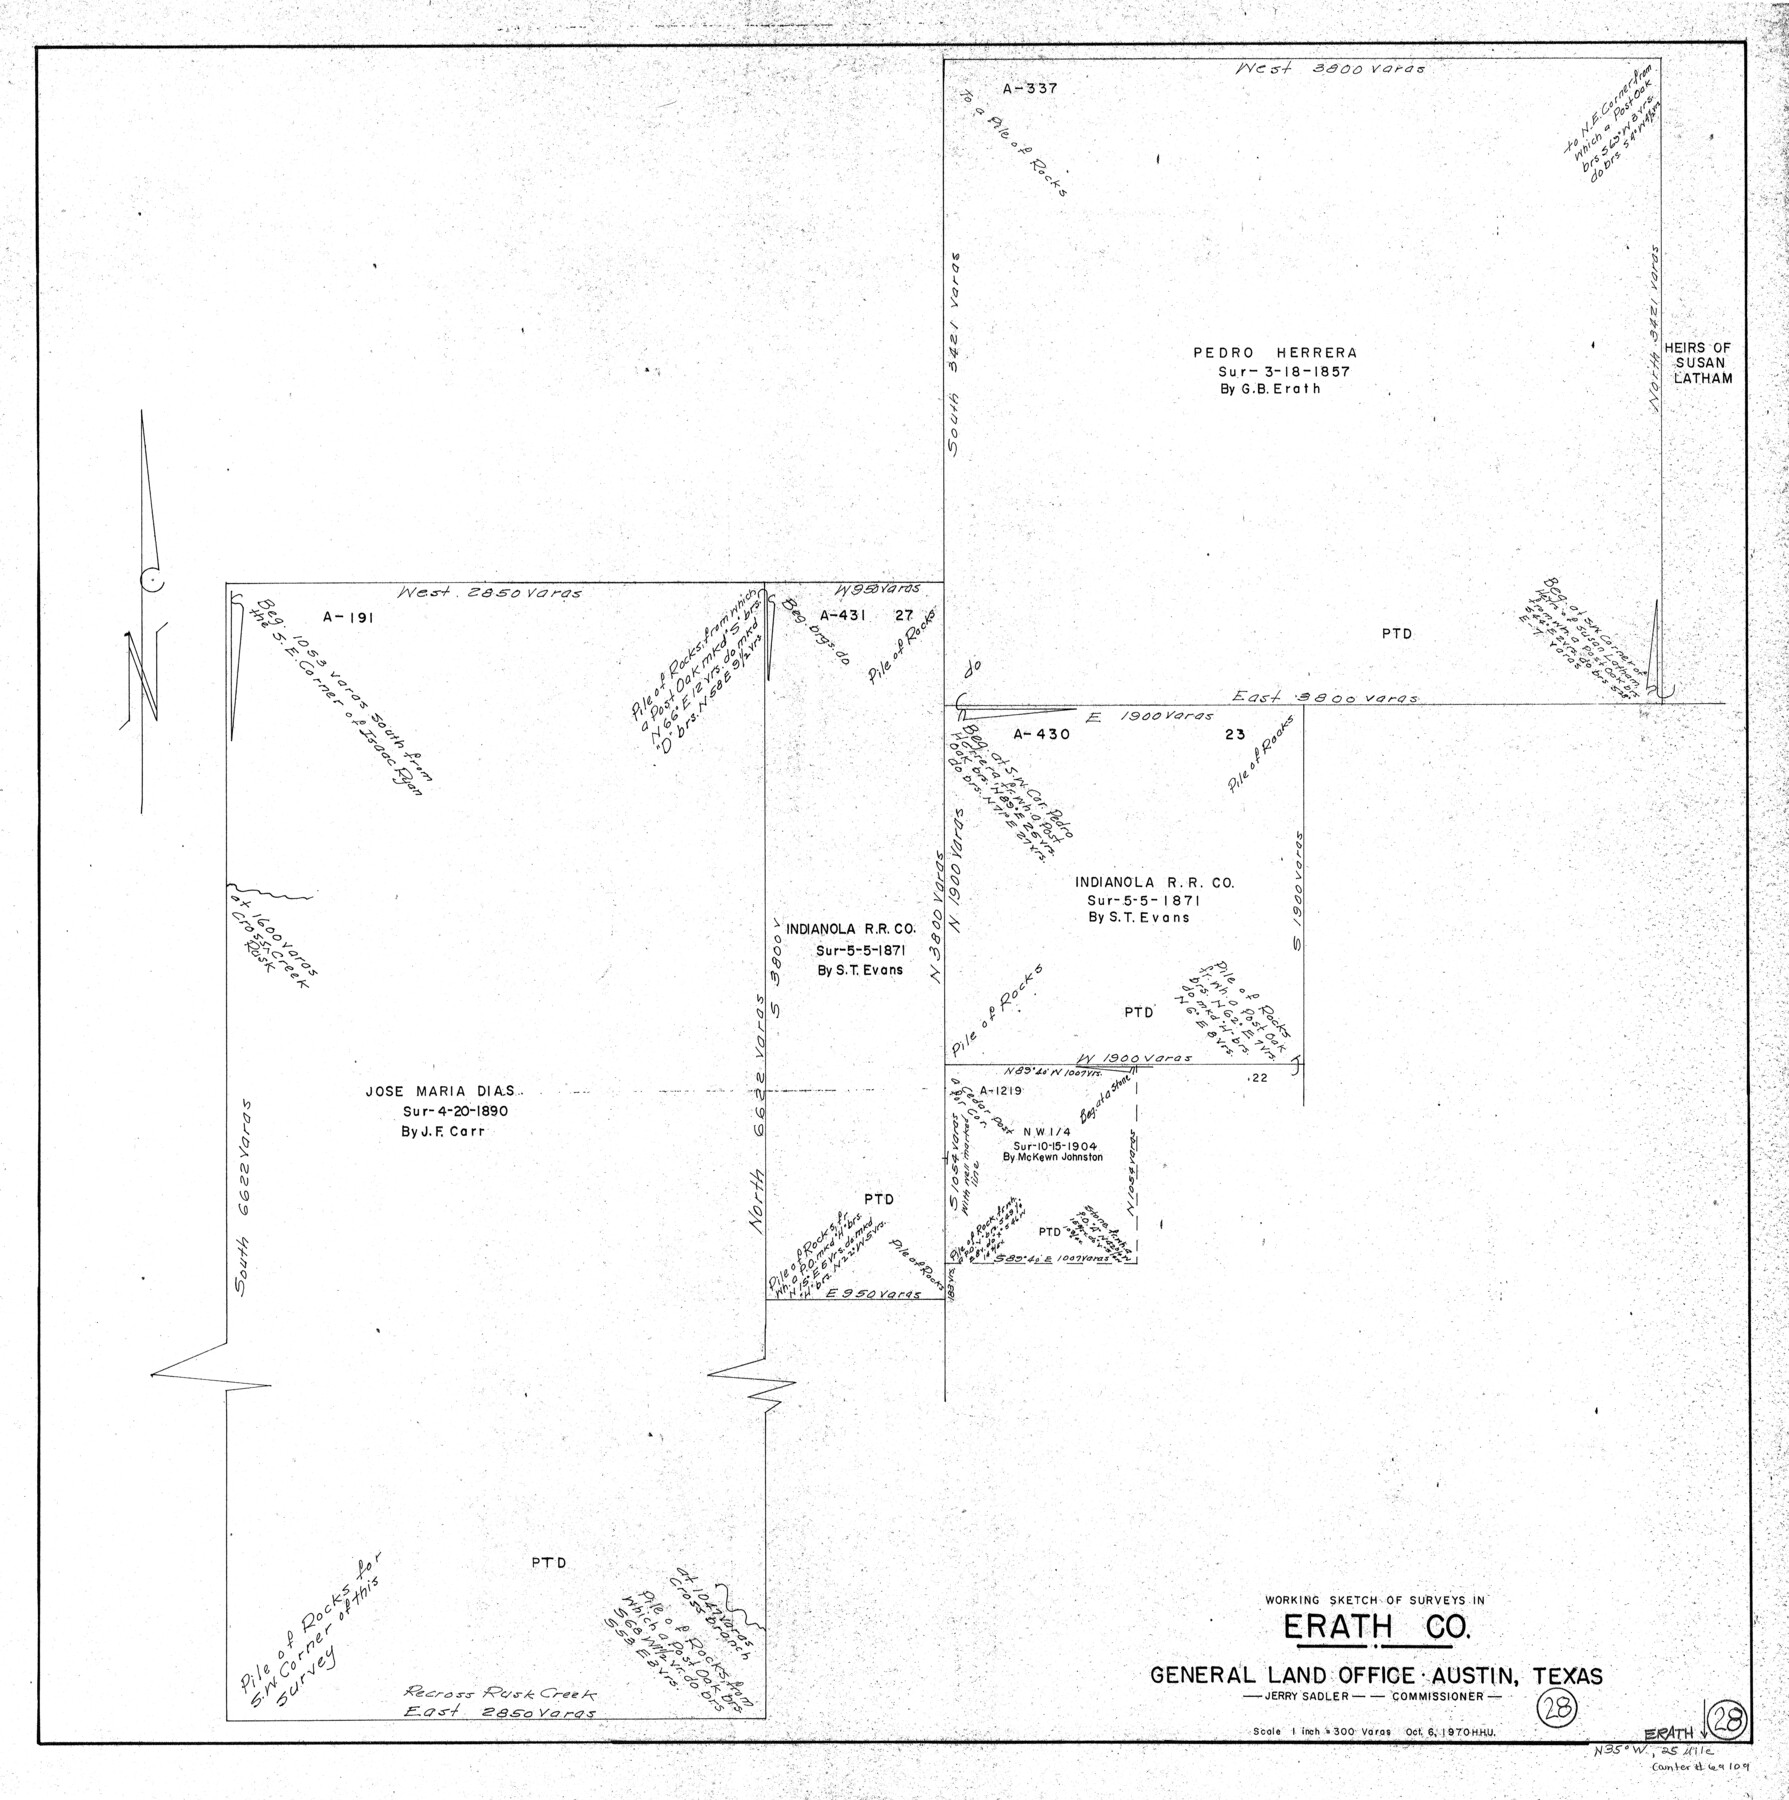 69109, Erath County Working Sketch 28, General Map Collection